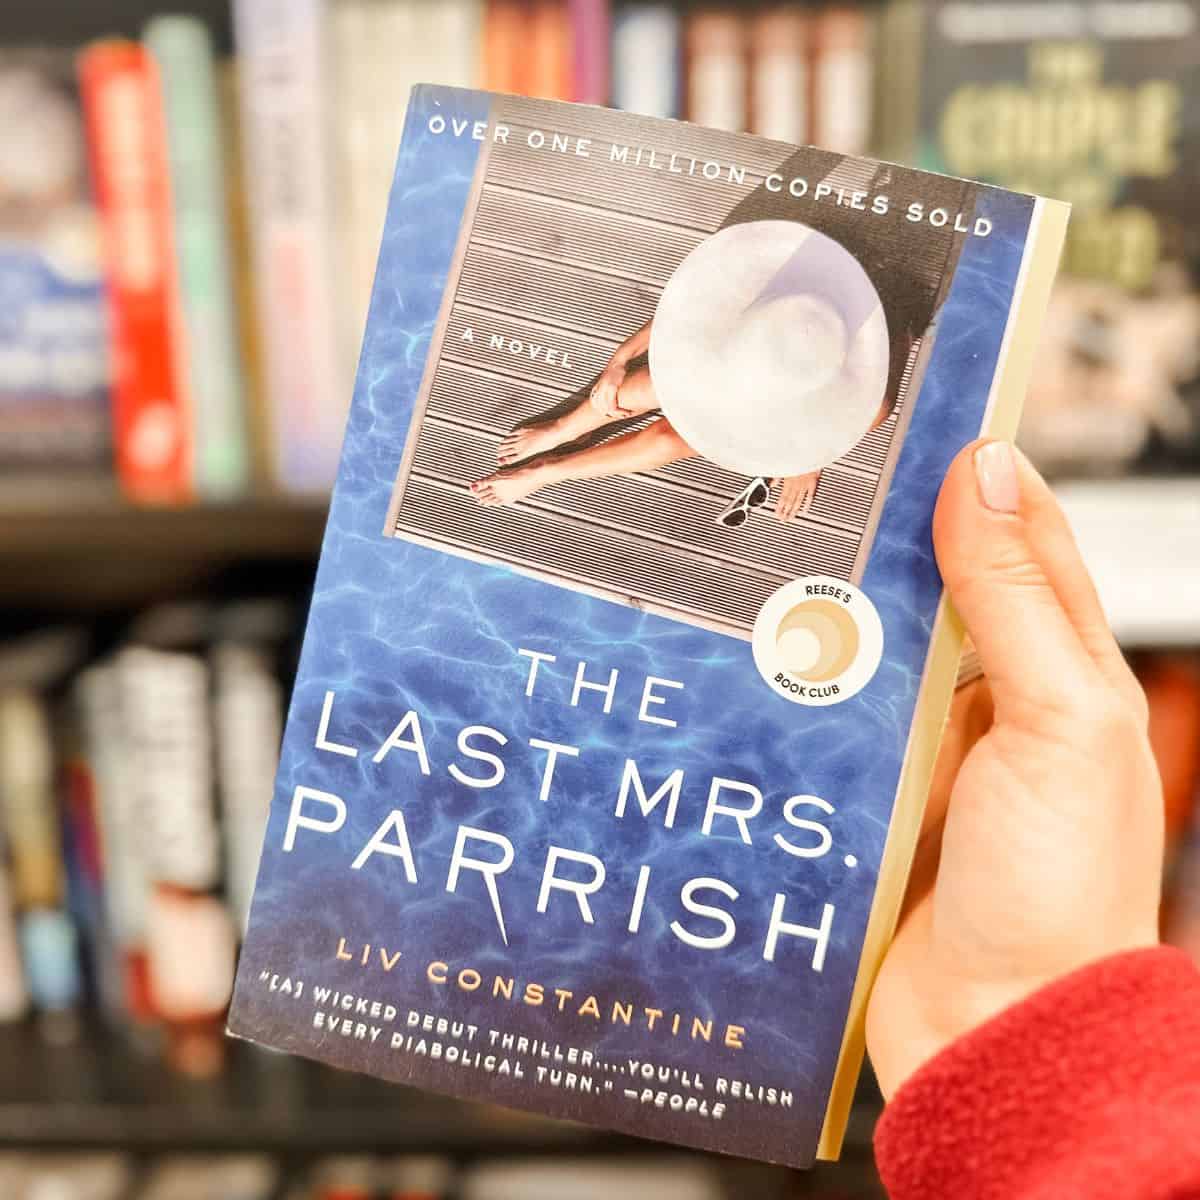 The last Mrs Parrish by liv Constantine held in front of a bookshelf.